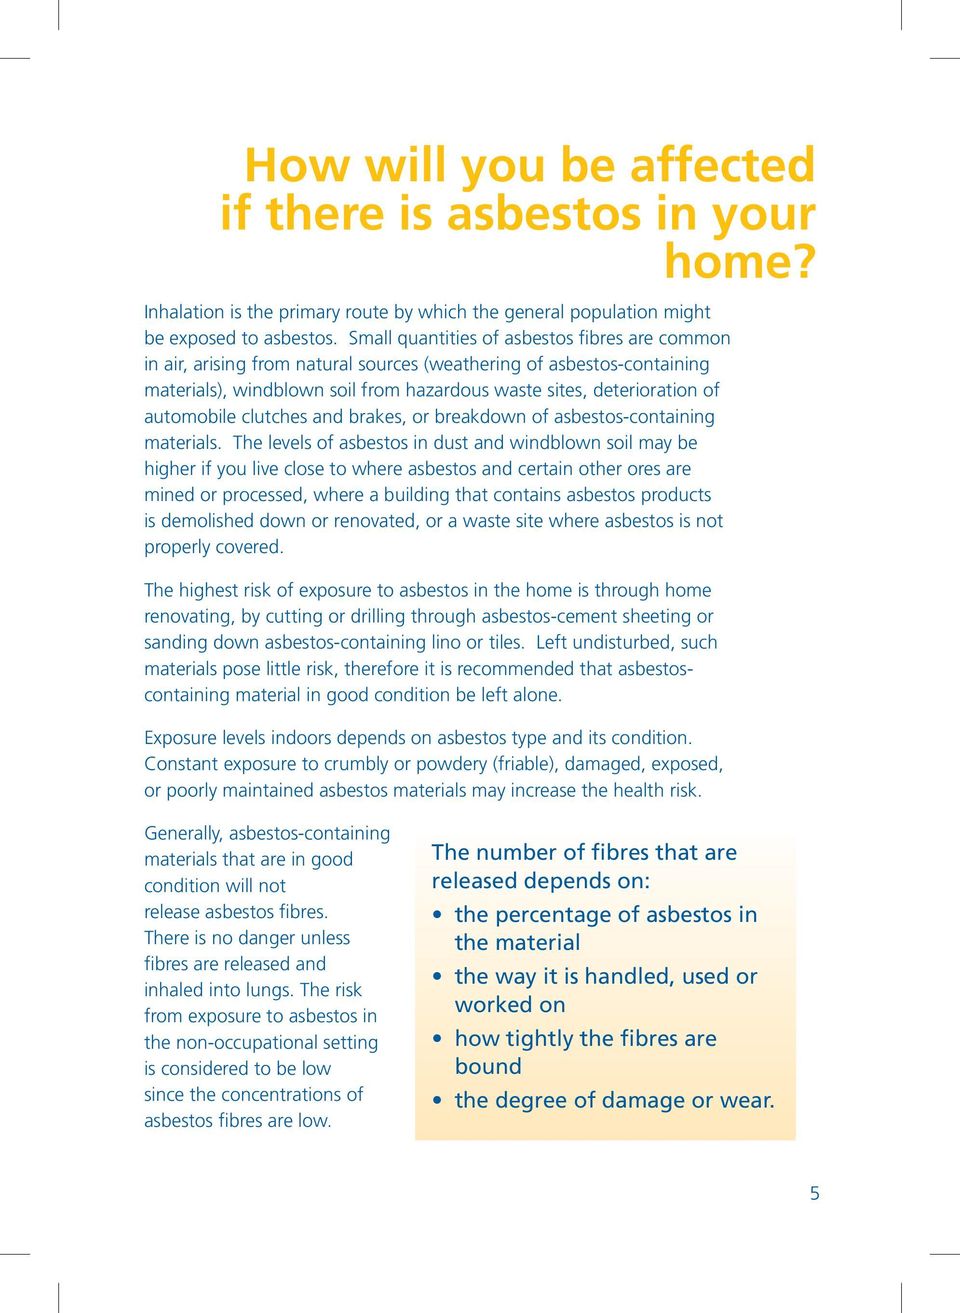 automobile clutches and brakes, or breakdown of asbestos-containing materials.